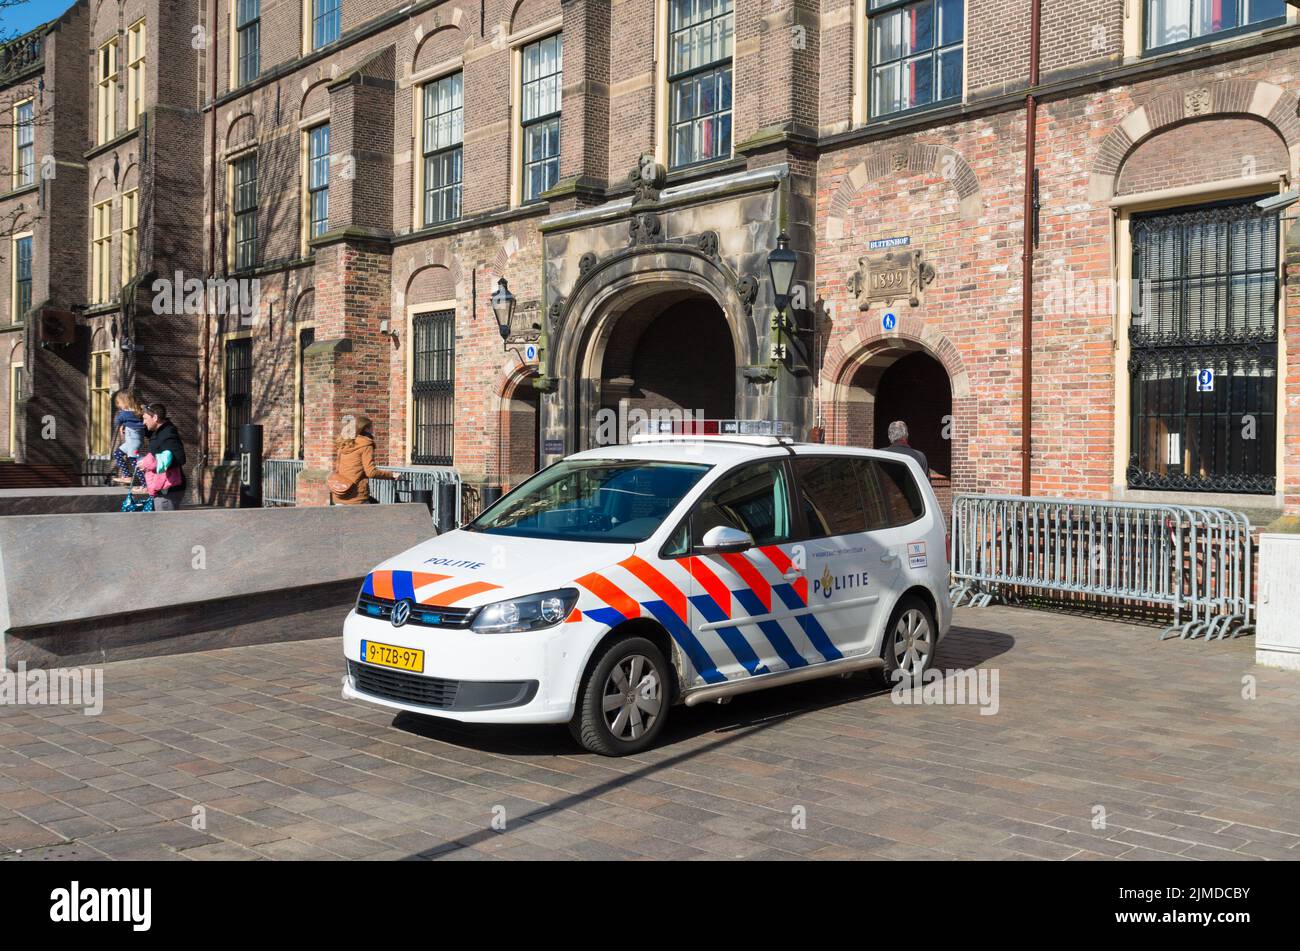 4,014 Holland Police Images, Stock Photos, 3D objects, & Vectors